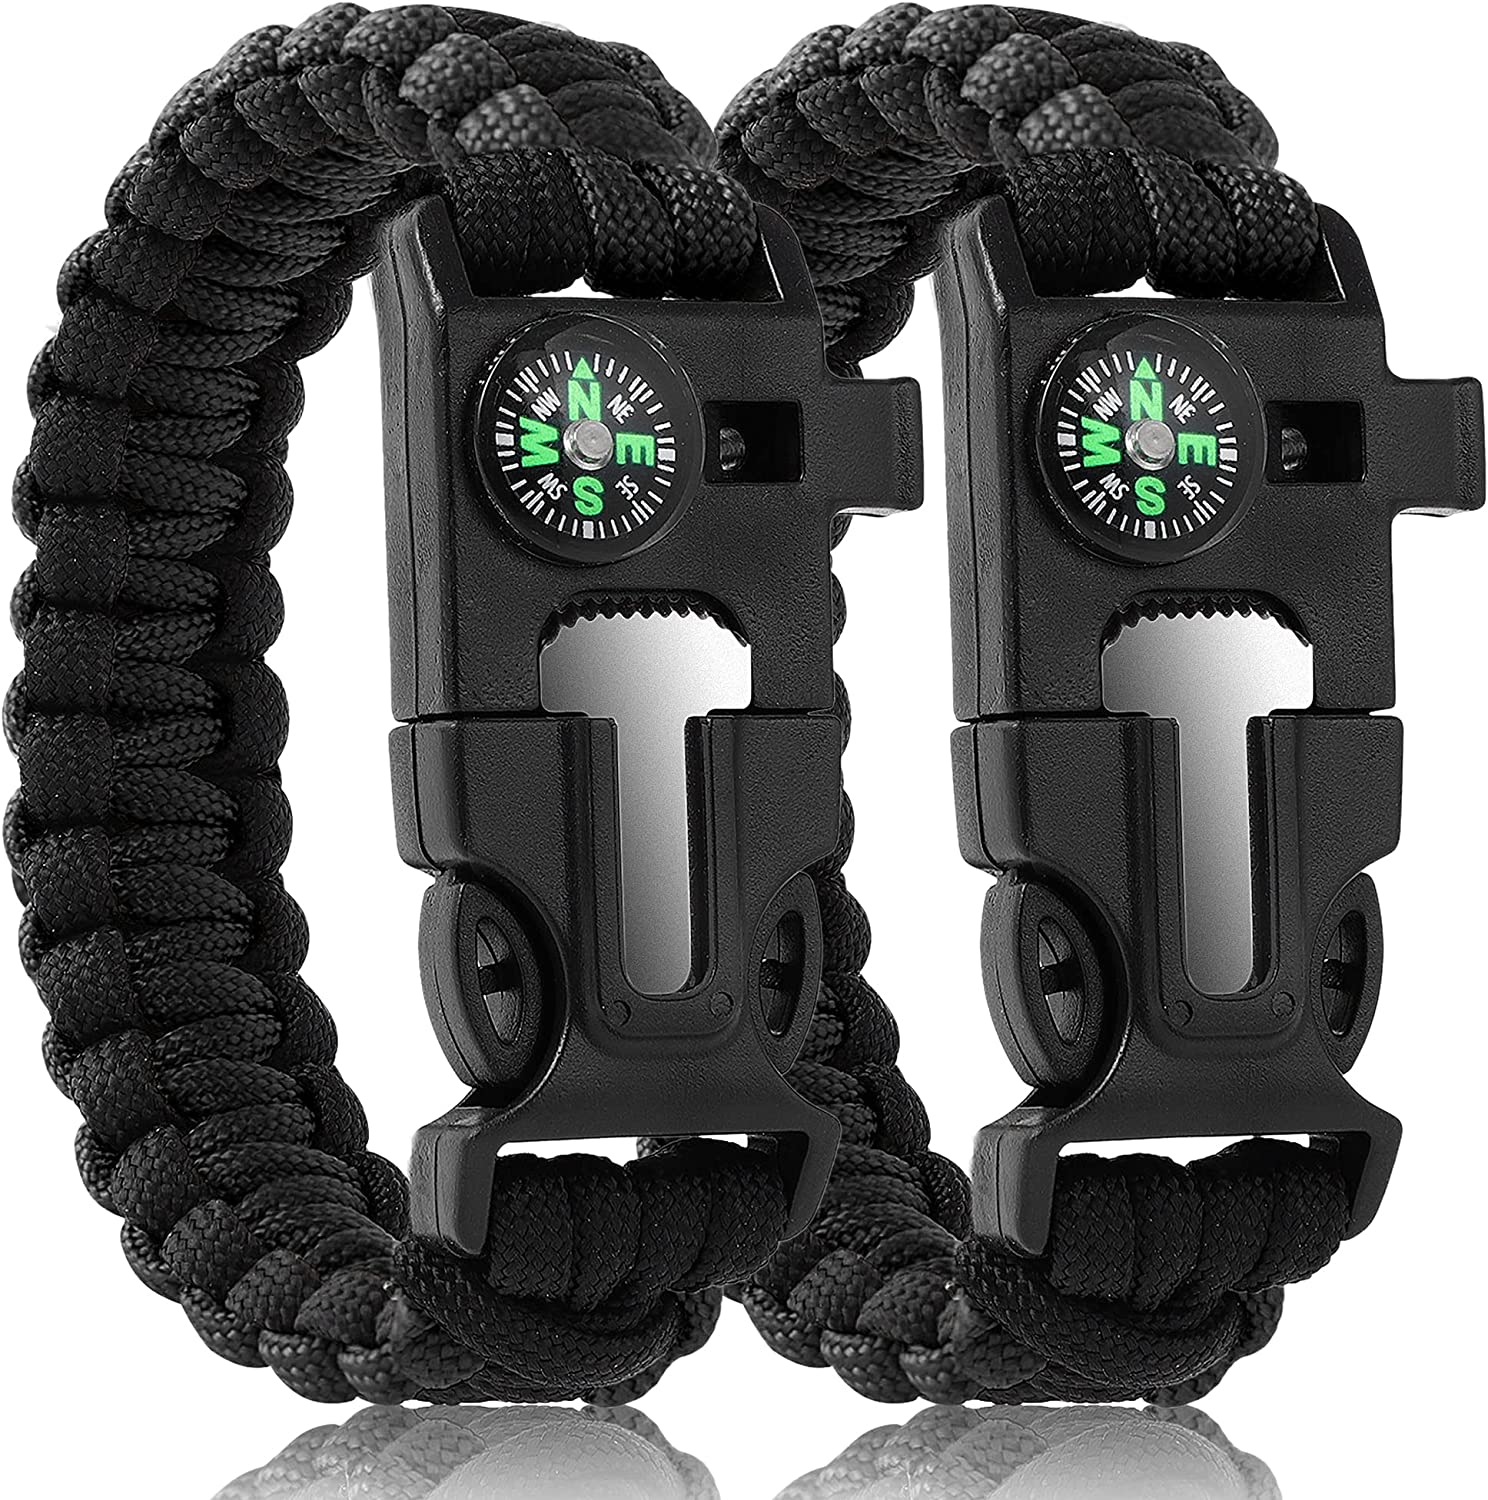 Oadnfa Paracord Bracelets,Survival Bracelets for Men Paracord Tactical 5-in-1 Camping Gear Kits,with 12-ft Detachable Parachute Rope,Fire Starter,Embedded Compass,Whistle&Emergency Multitools